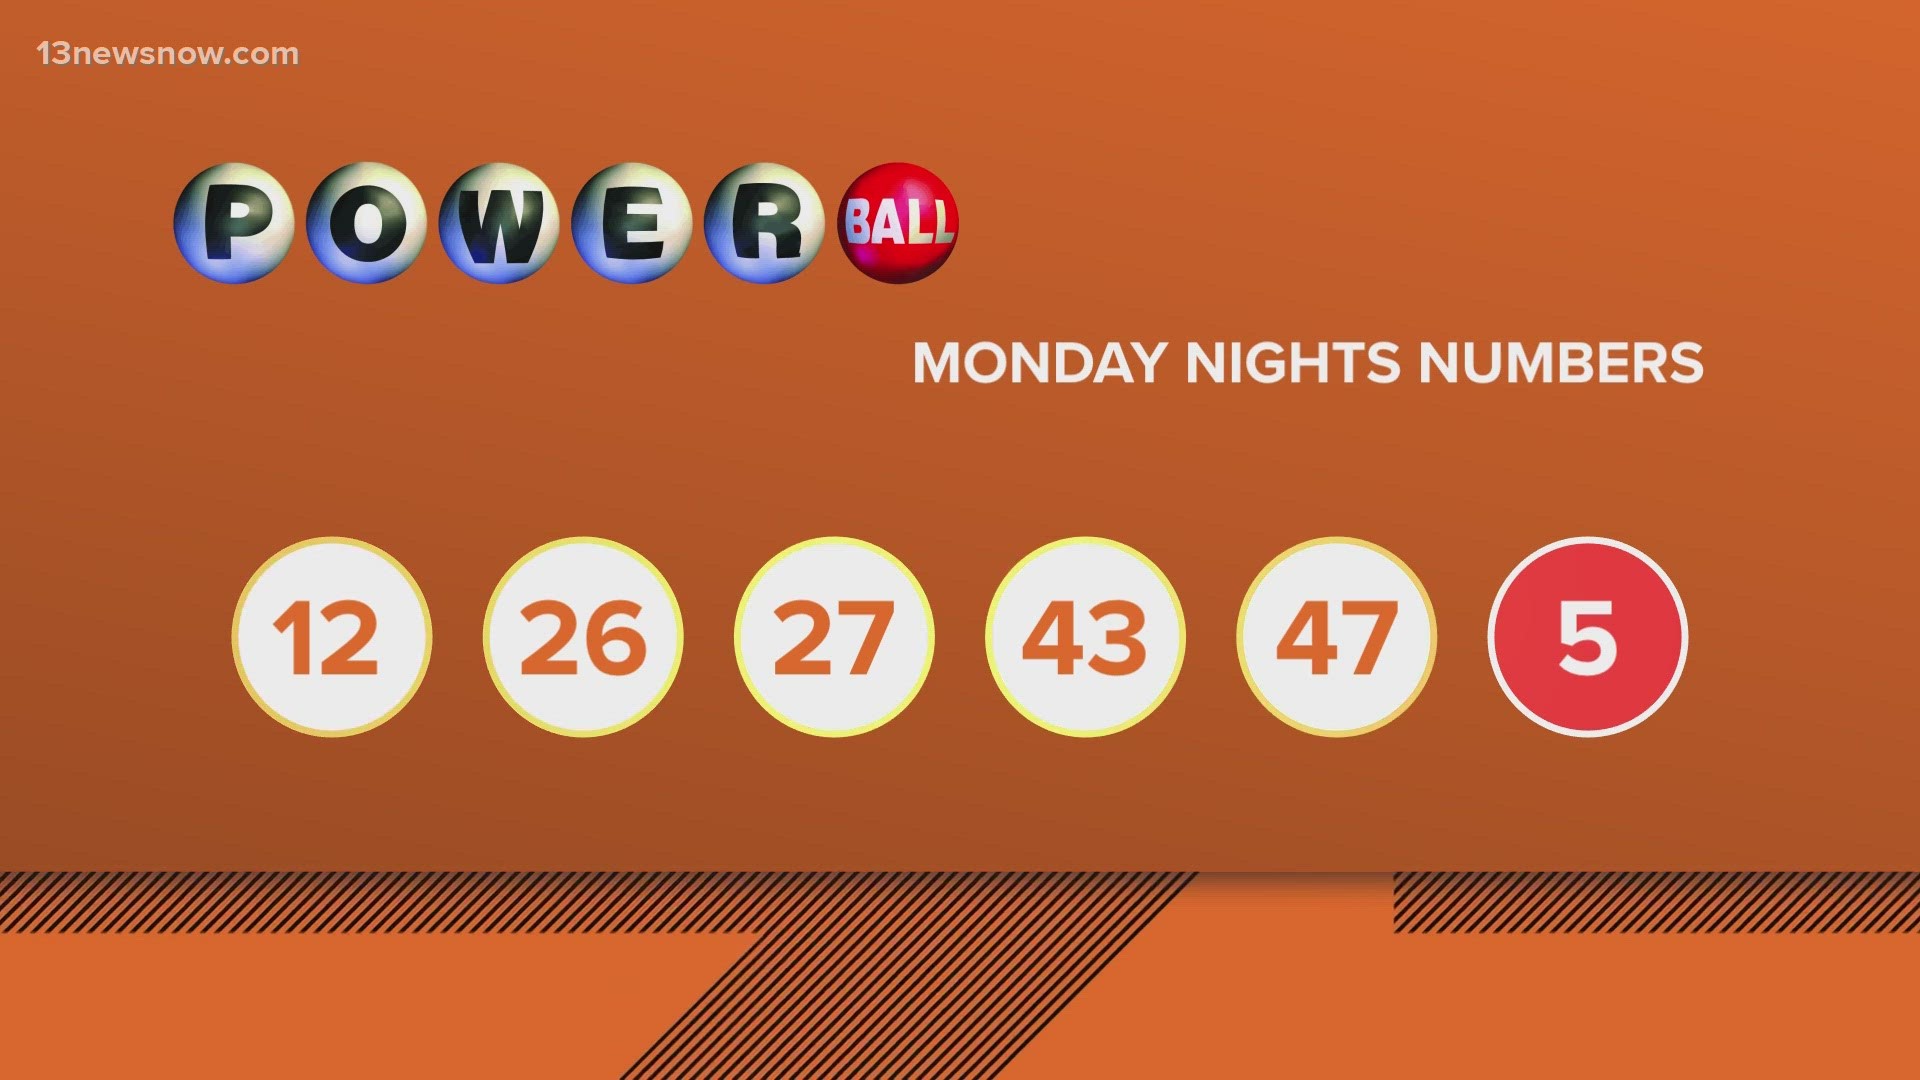 The Powerball jackpot prize is now at $1.2 billion. Monday's numbers were 12, 26, 27, 43, 47. Today might be Bethany's lucky day.